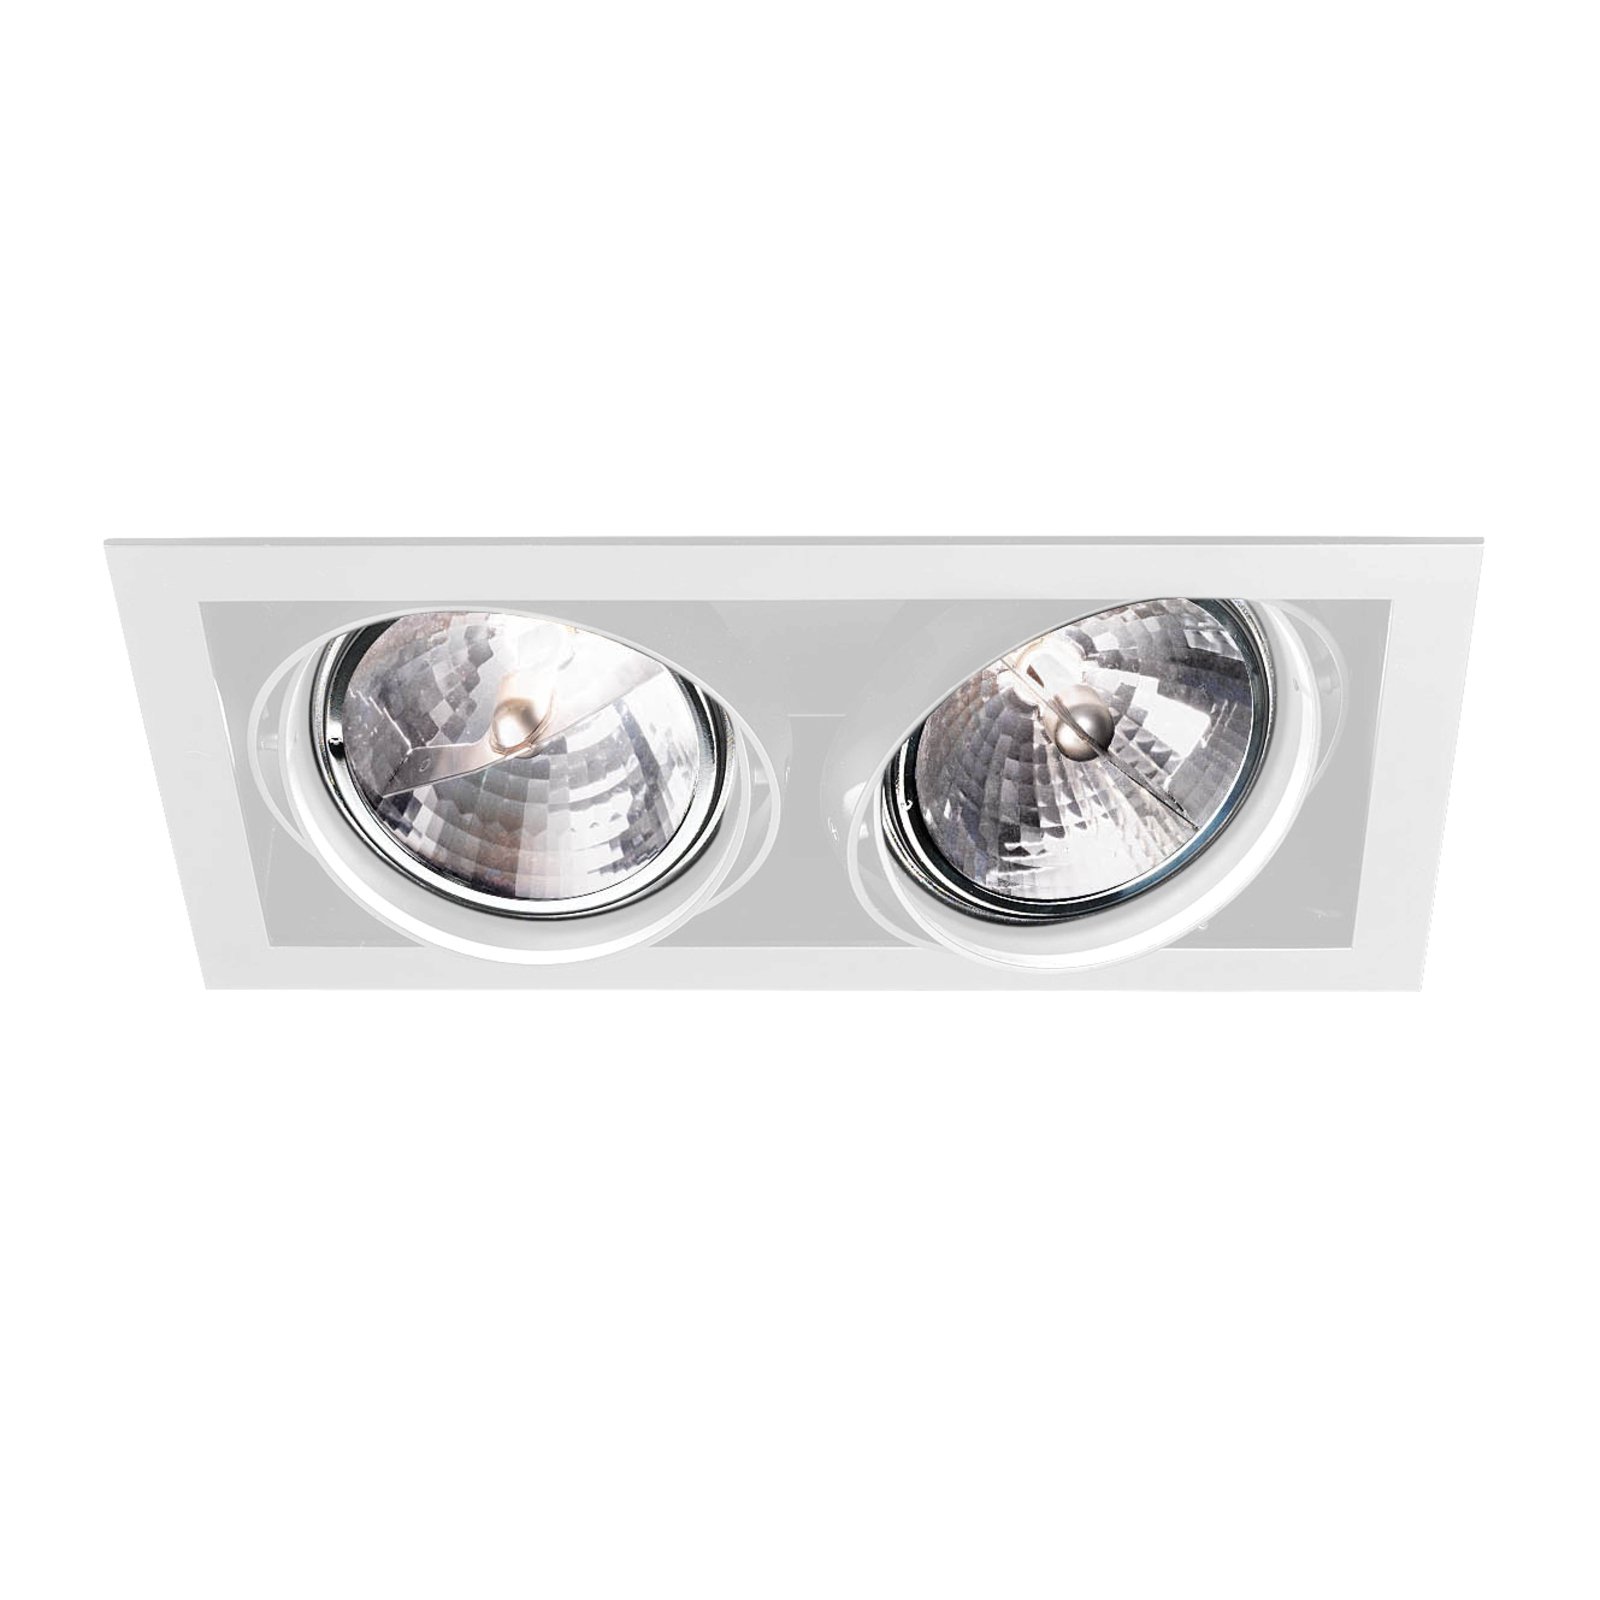 Frame 150 low-voltage downlight, 2-bulb, white